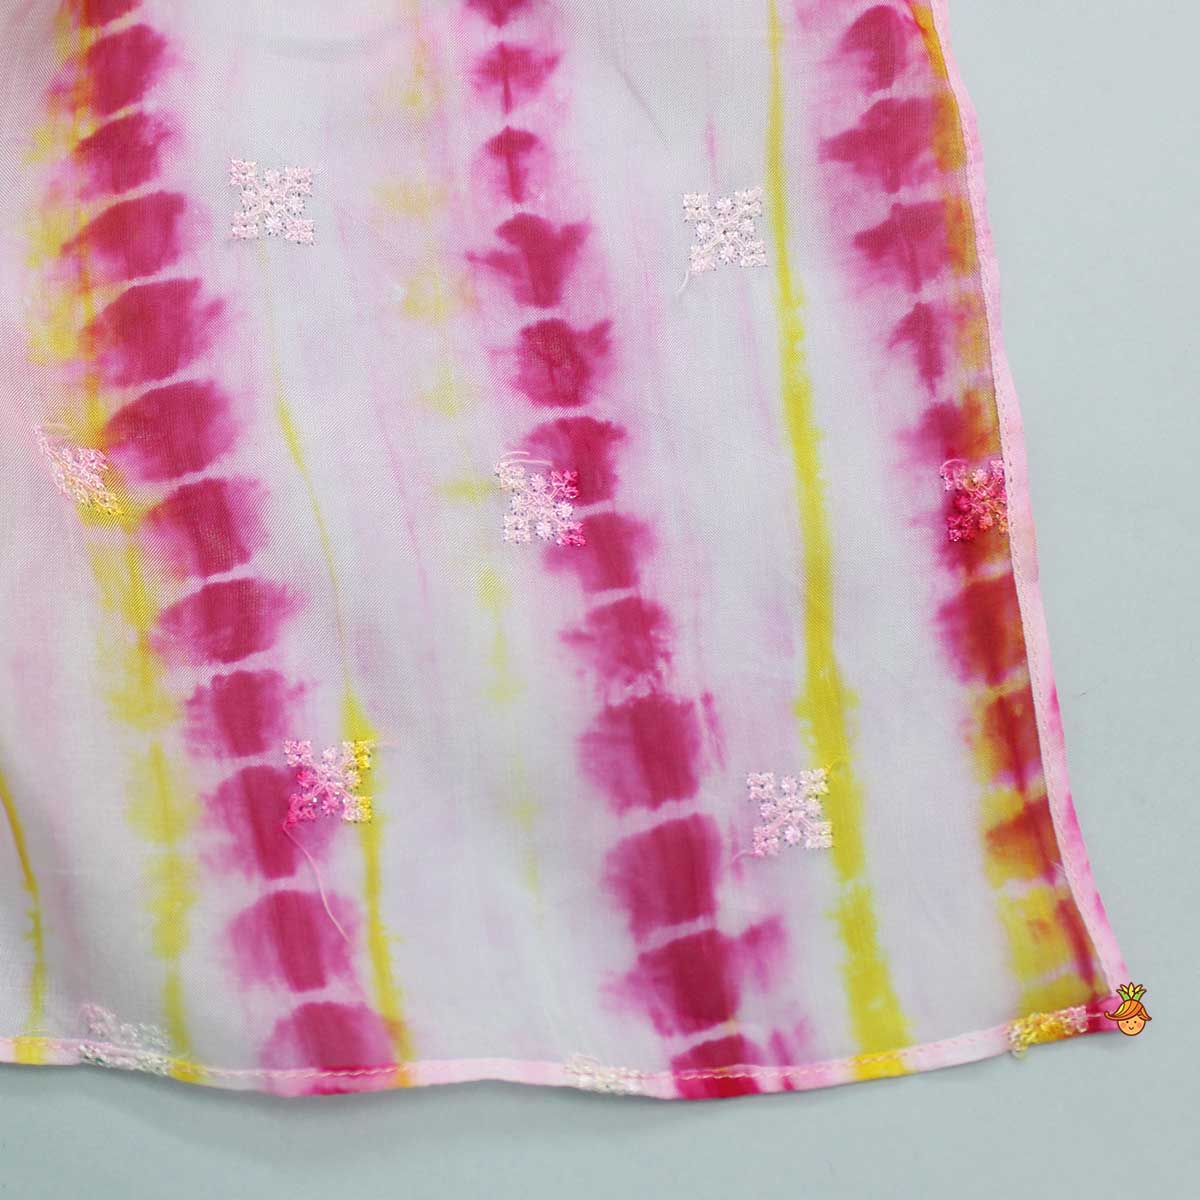 Pink Adjustable Straps Top With Shibori Printed Cape And Dhoti Style Skirt